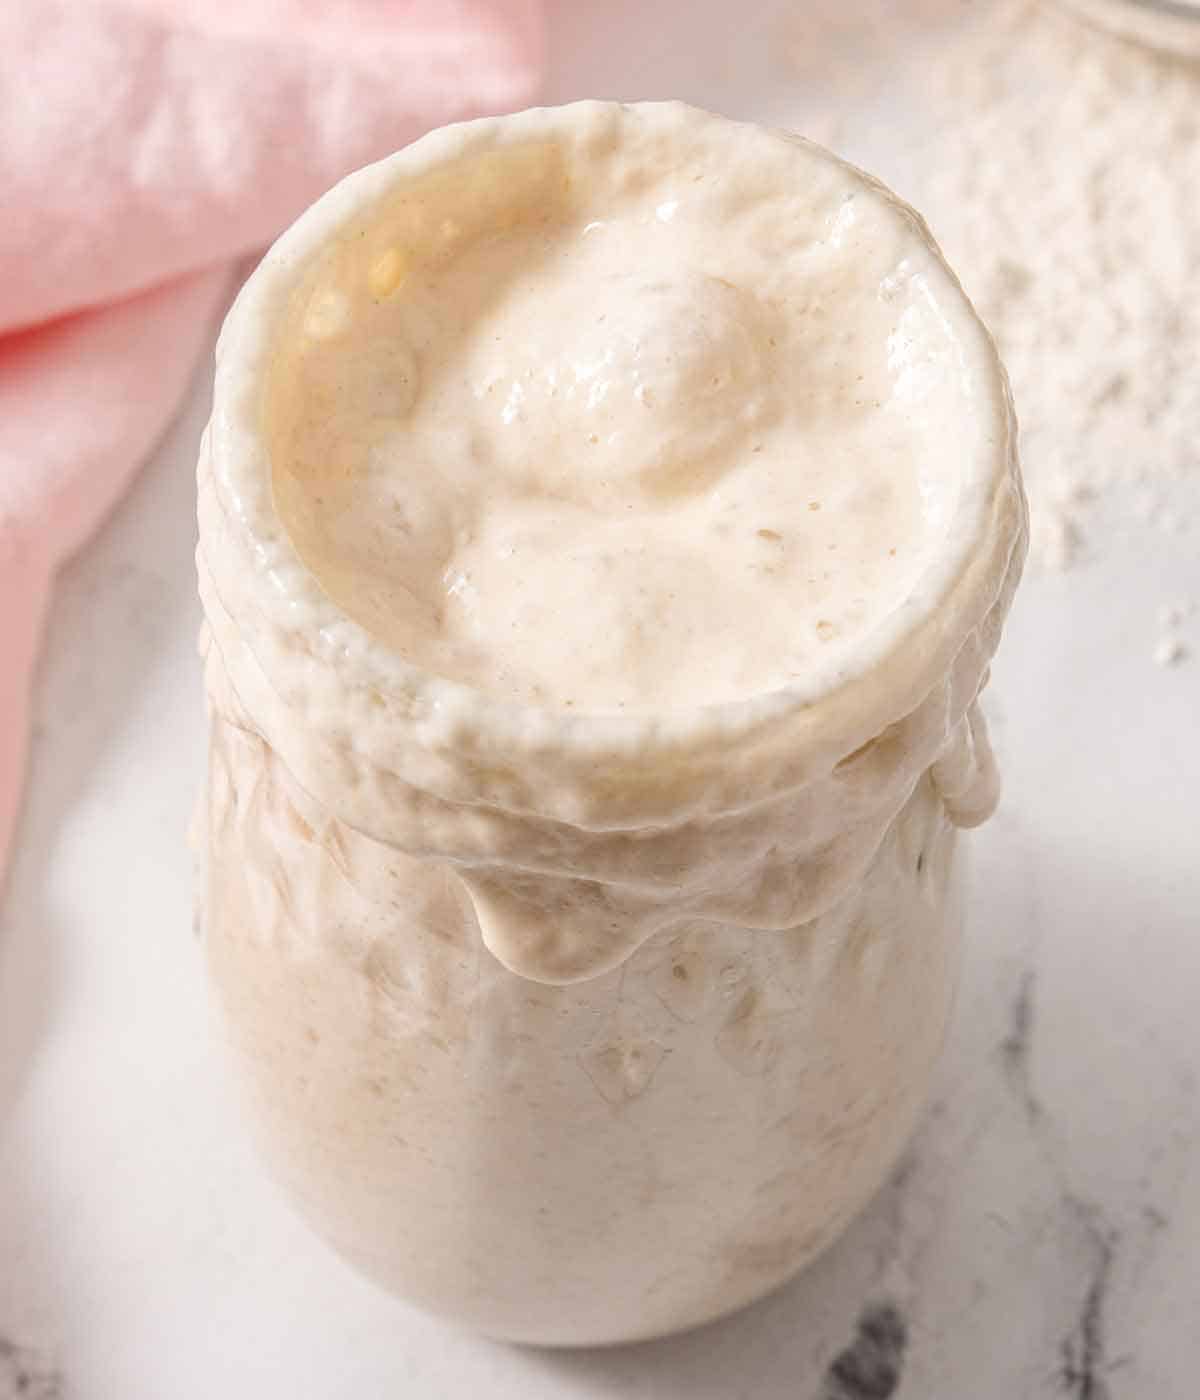 Angled overhead view of a jar of bubbly sourdough starter.